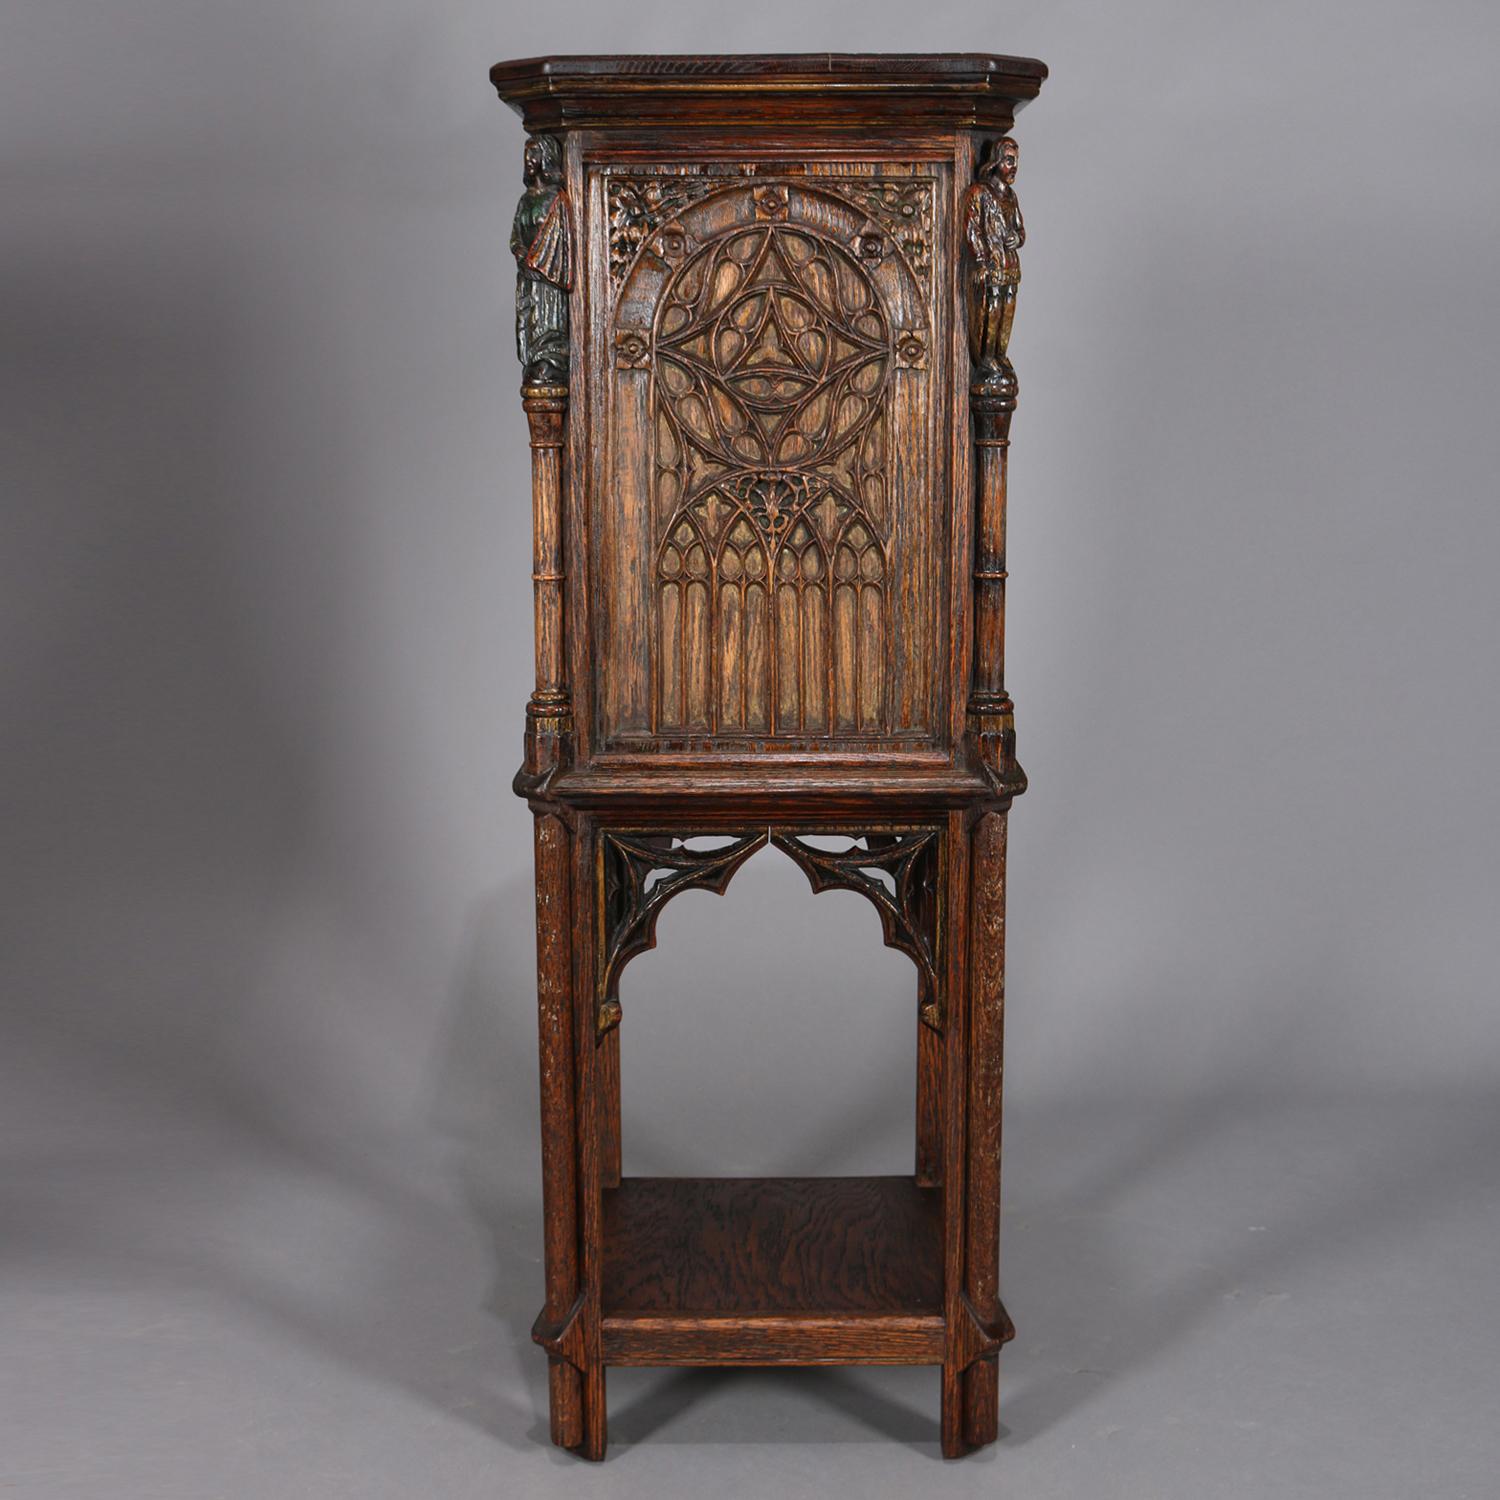 English Gothic Figural Carved Oak Polychromed and Gilt Cellarette Cabinet, circa 1880